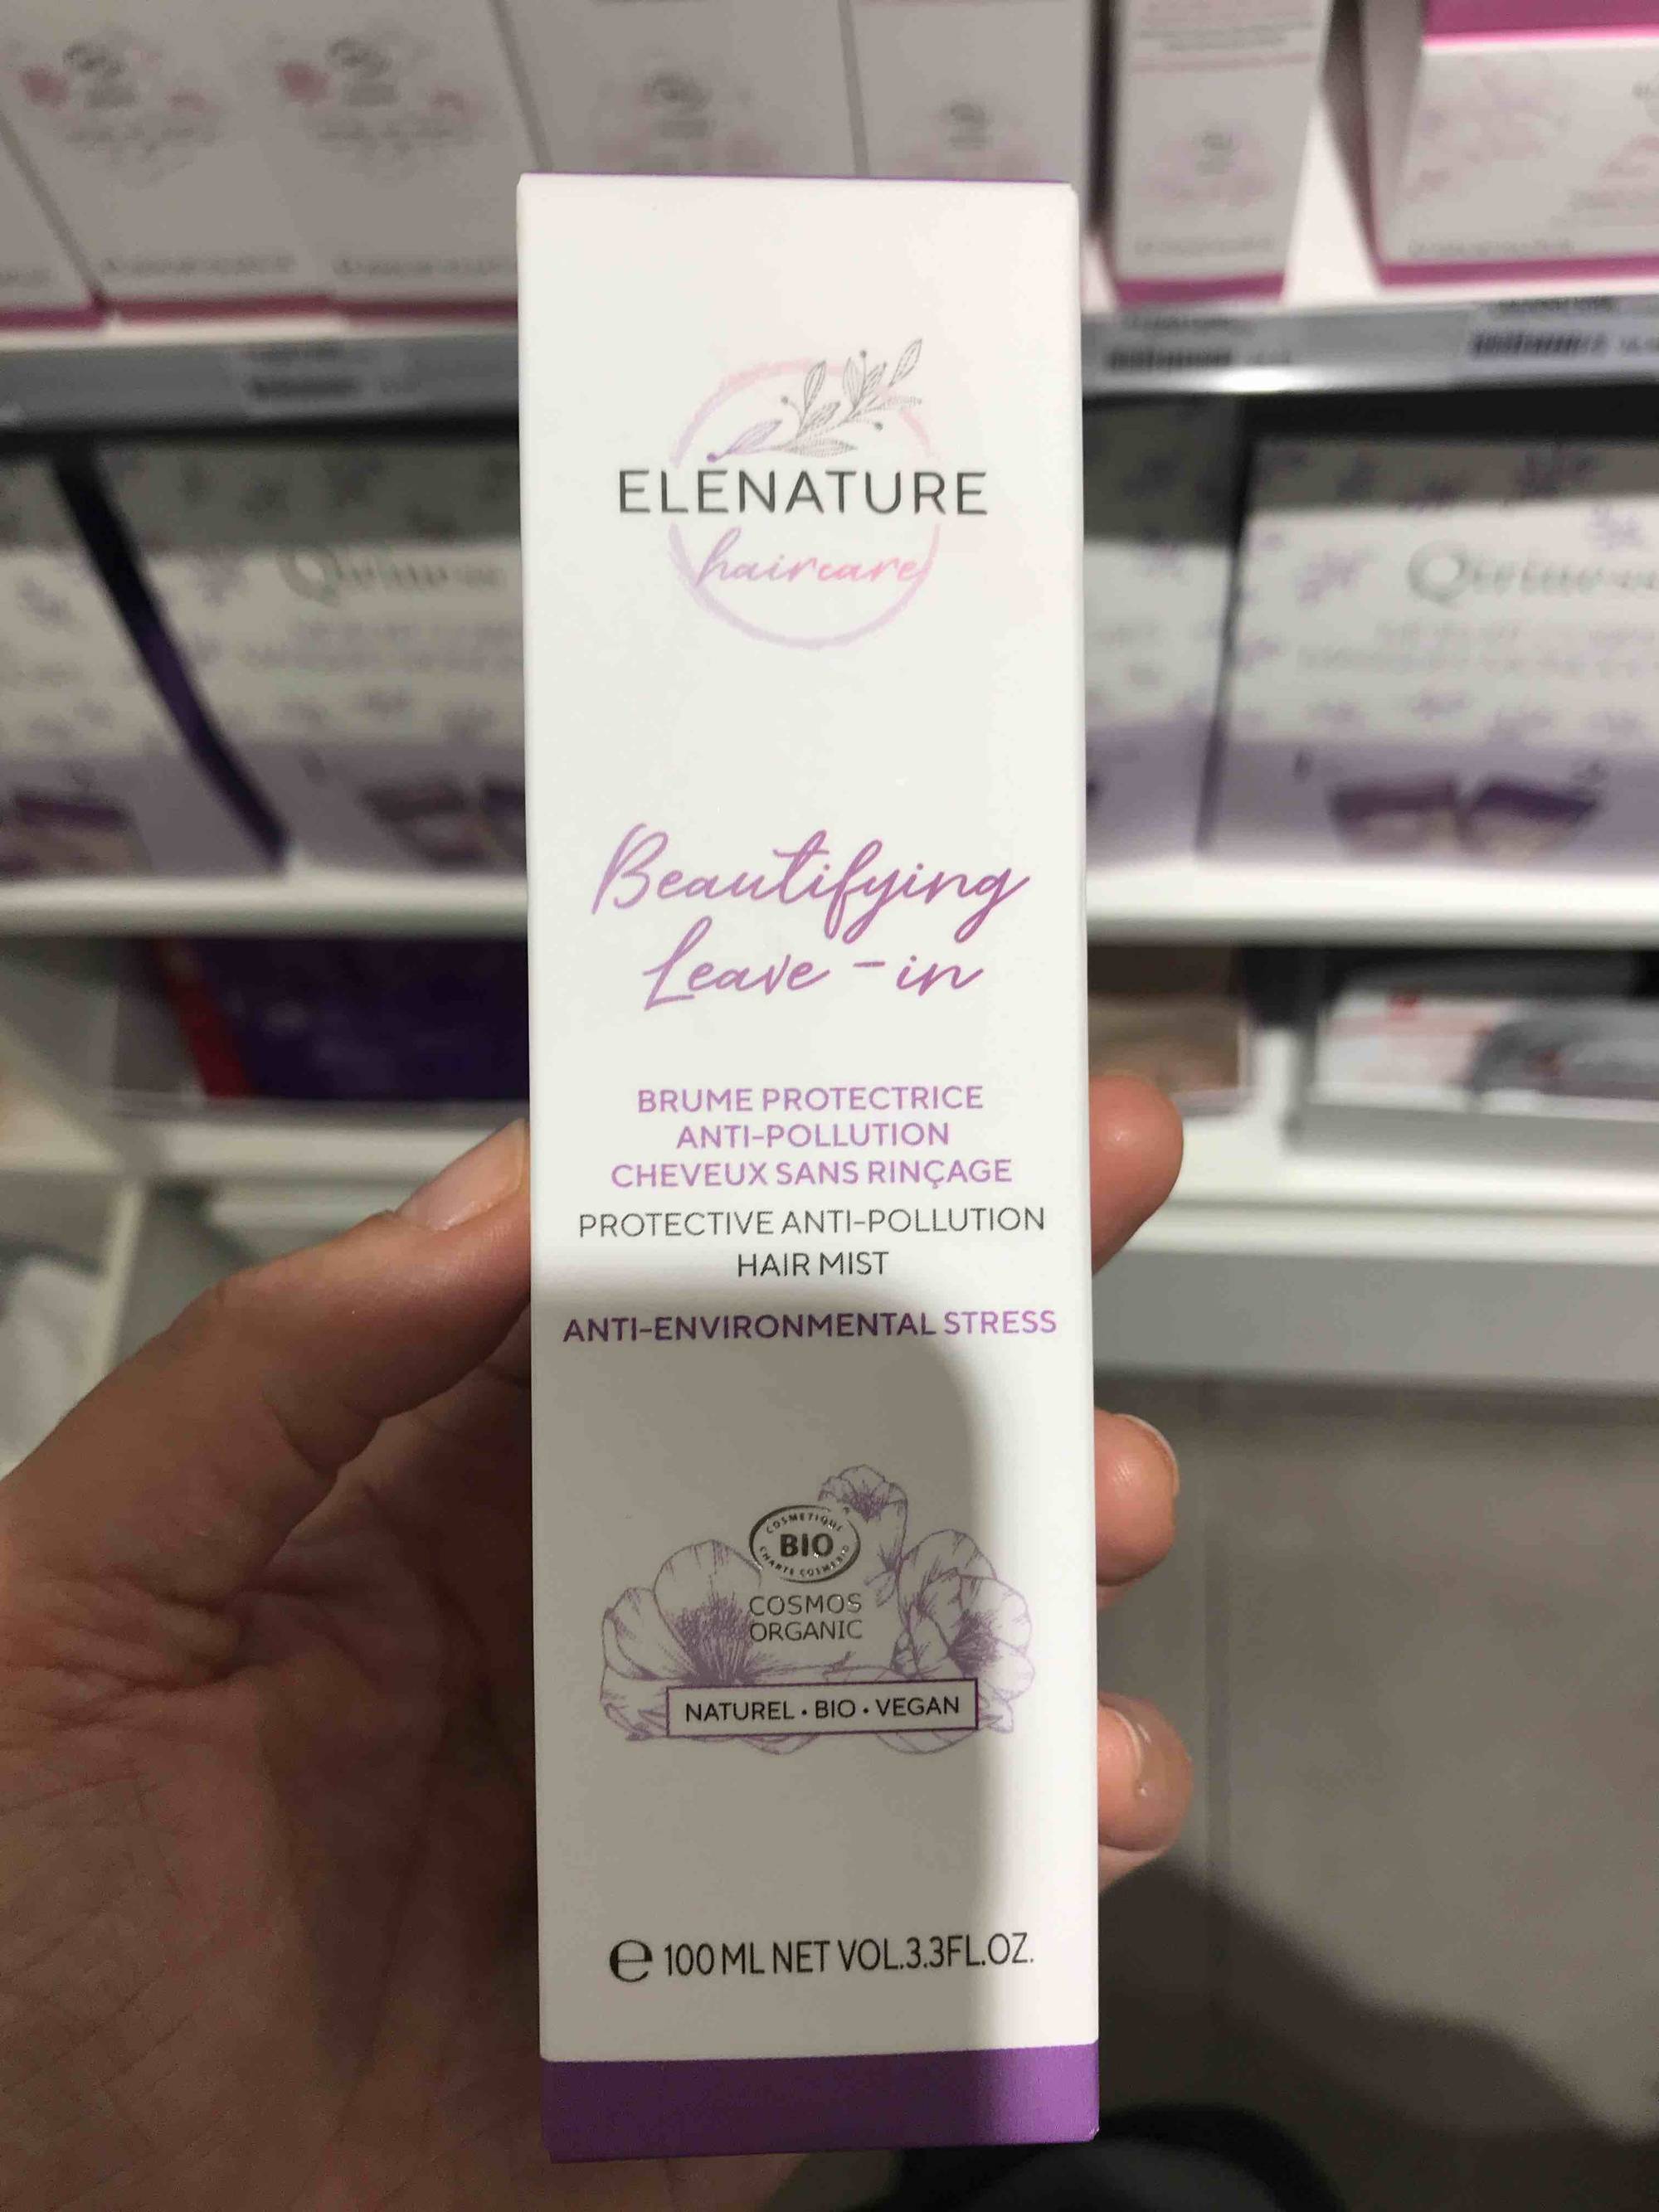 ELENATURE - Beautifying leave-in - Brume protectrice anti-pollution